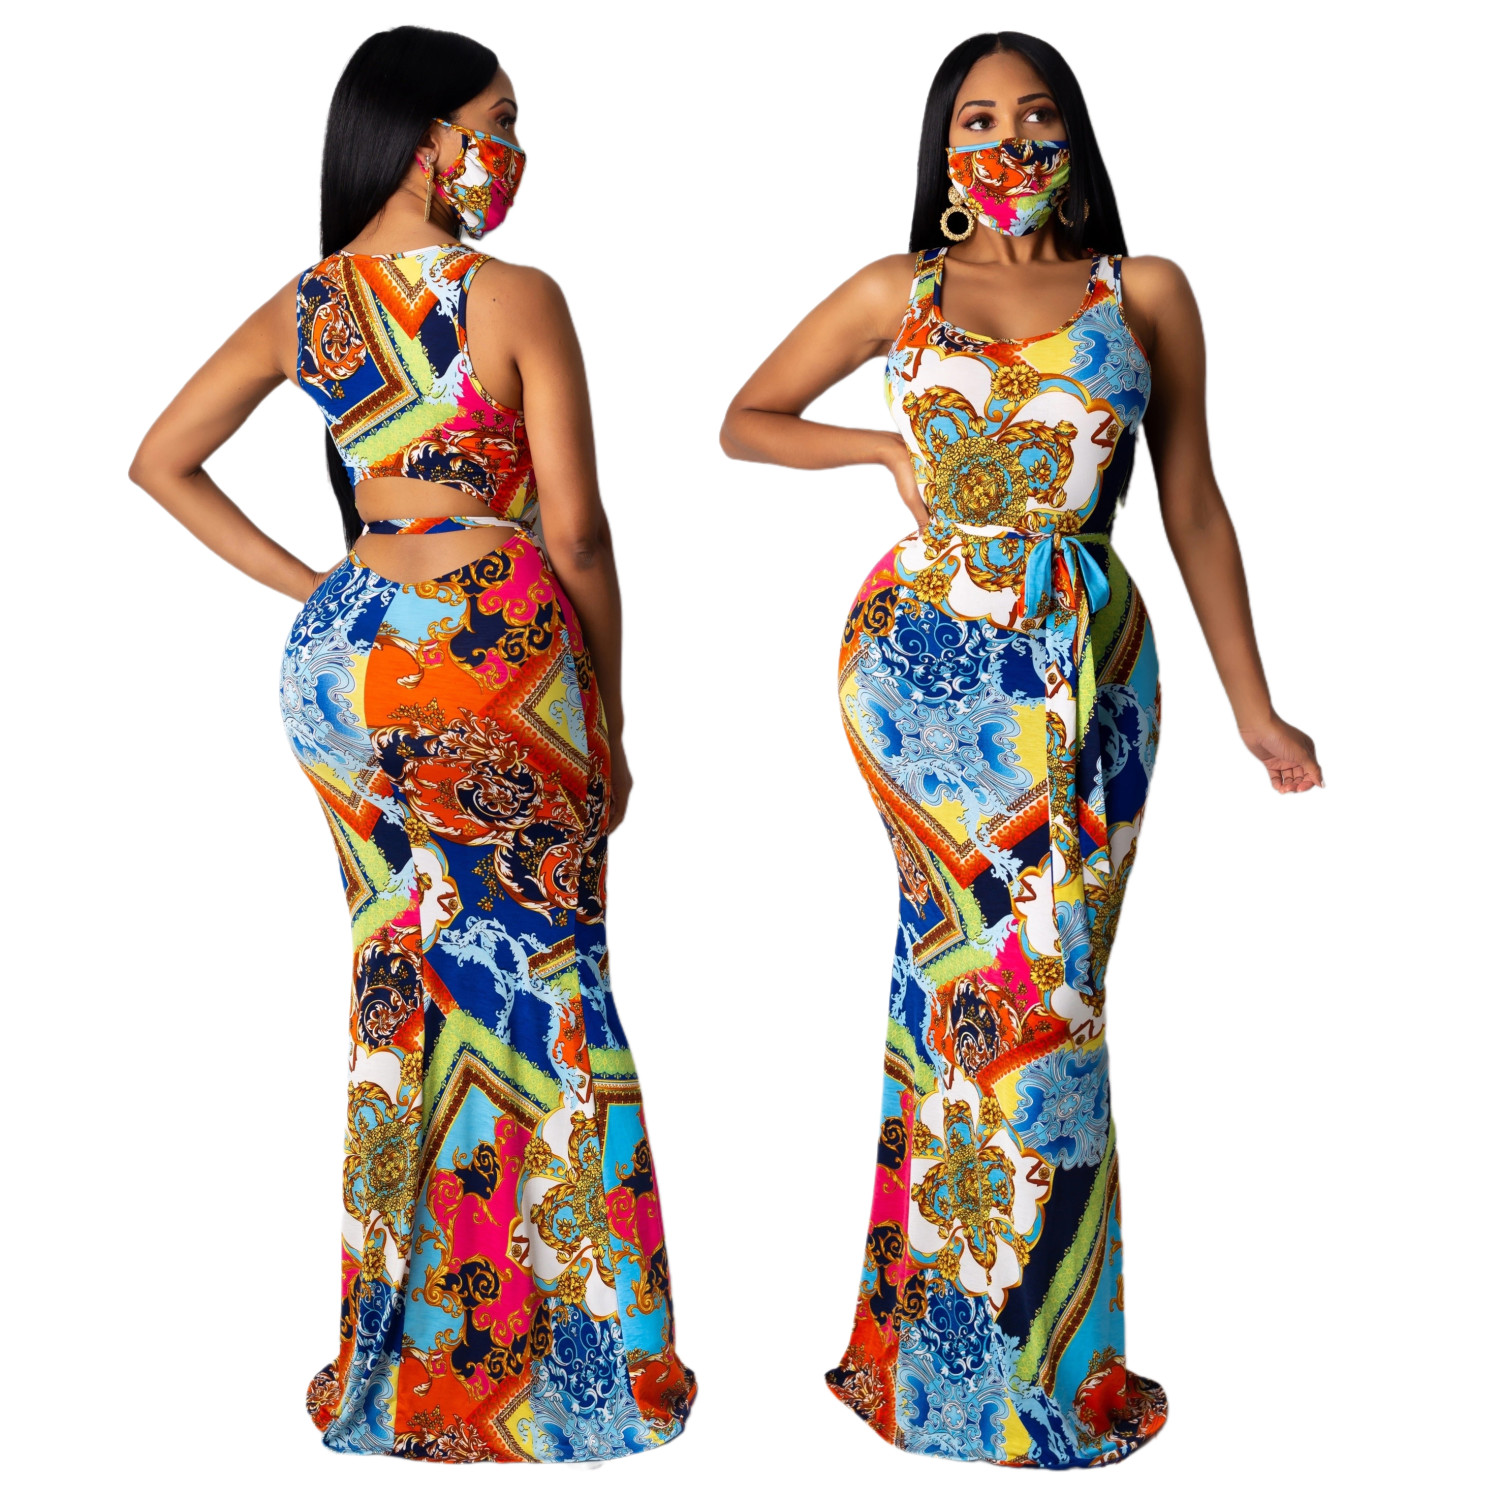 US$ 10.98 - sexy printing maxi dress the face mask is included 9647 ...